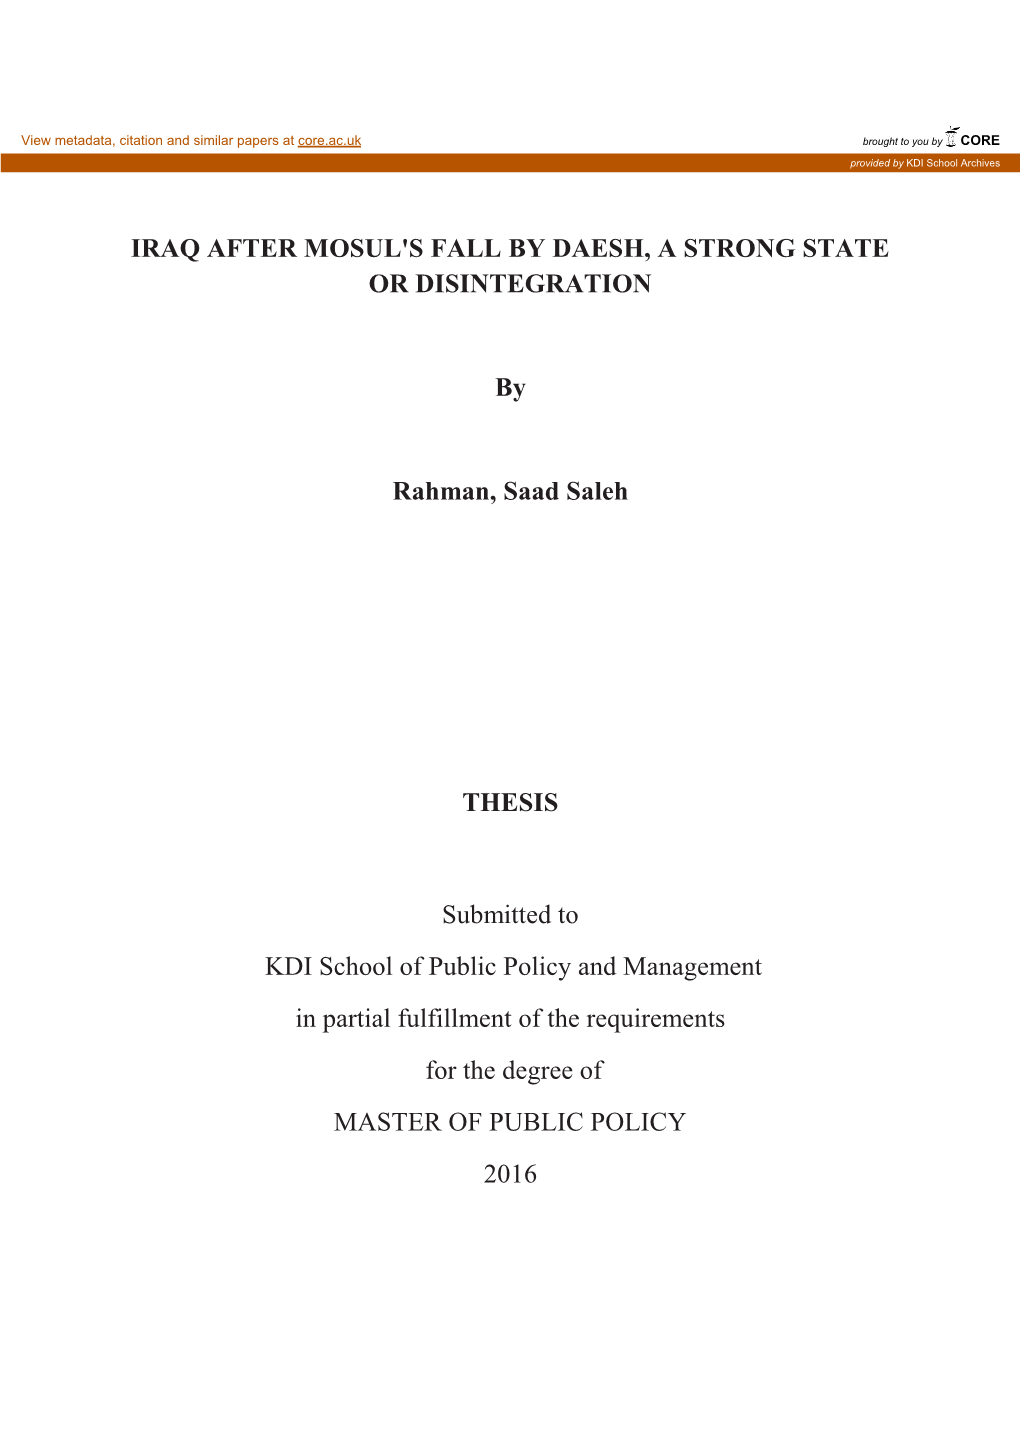 IRAQ AFTER MOSUL's FALL by DAESH, a STRONG STATE OR DISINTEGRATION by Rahman, Saad Saleh THESIS Submitted to KDI School of Publi